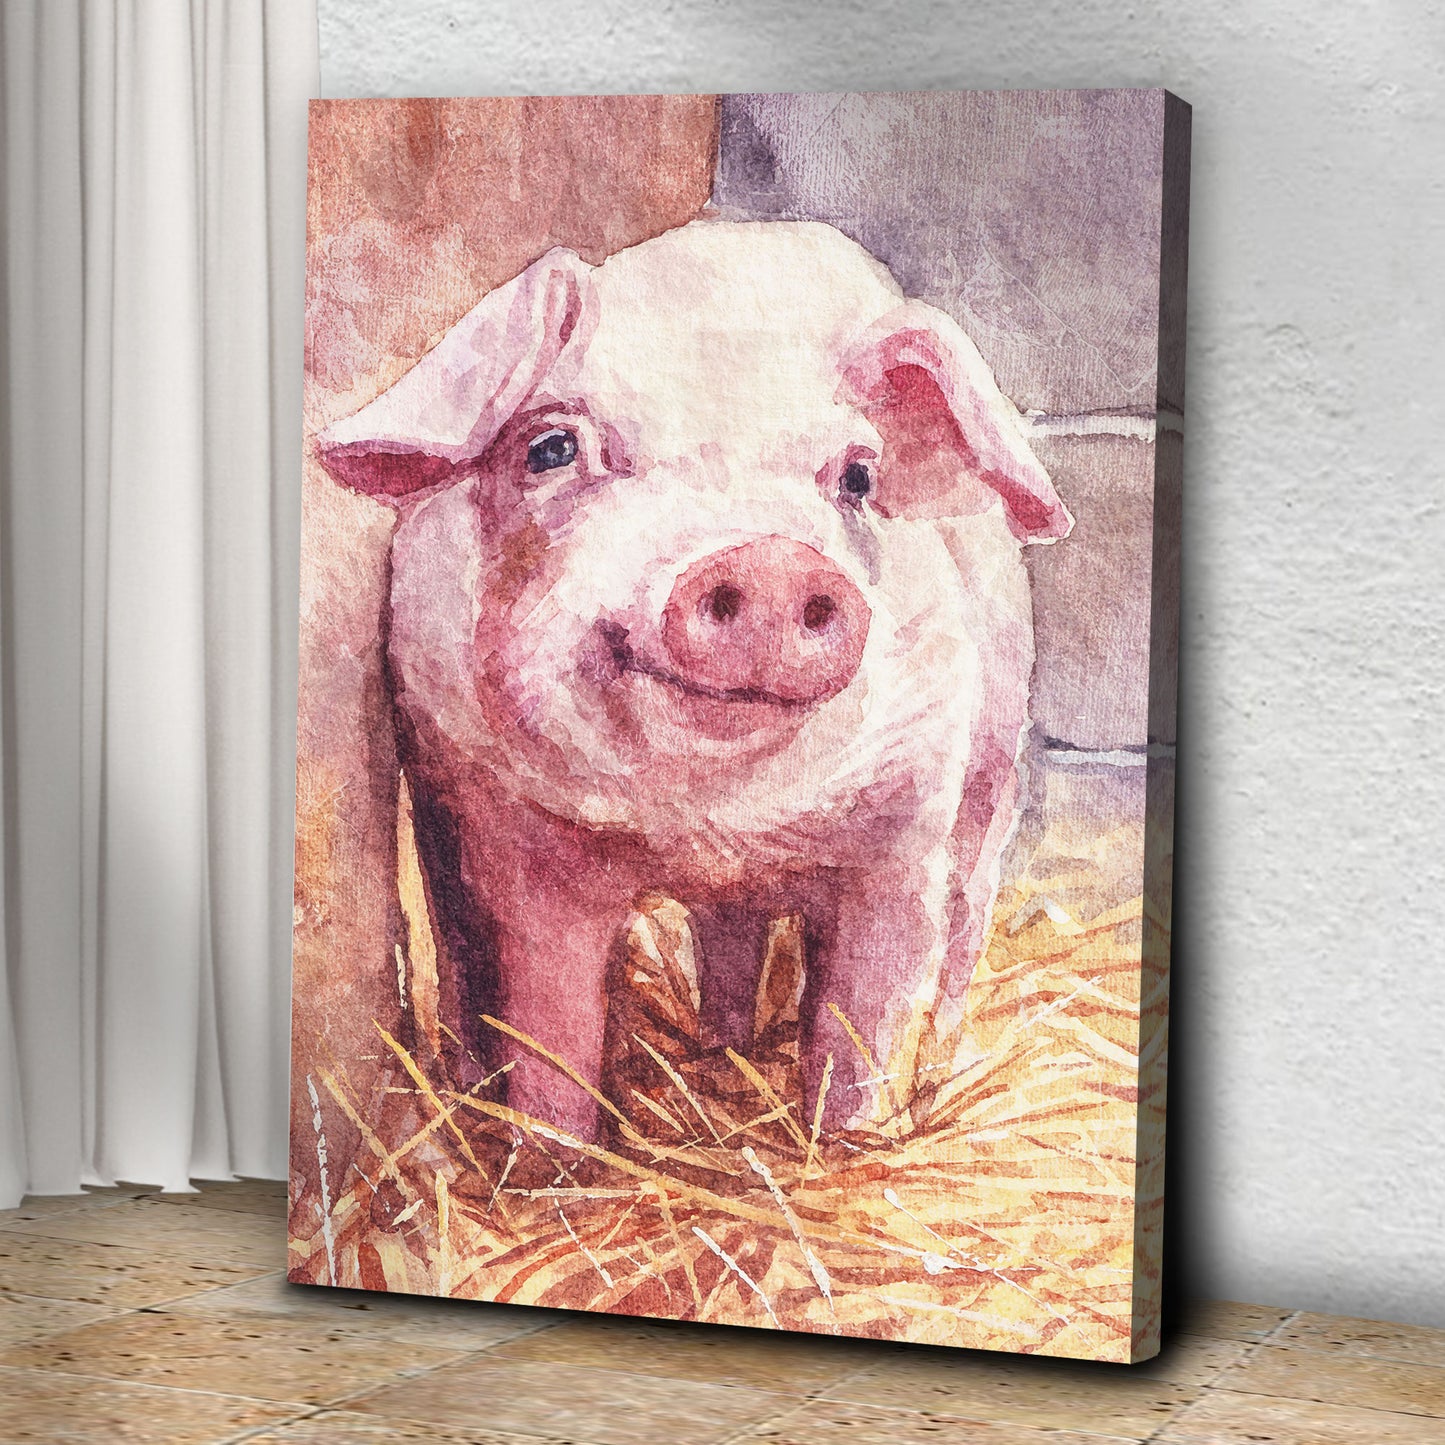 Pig On Hay Canvas Wall Art Style 1 - Image by Tailored Canvases